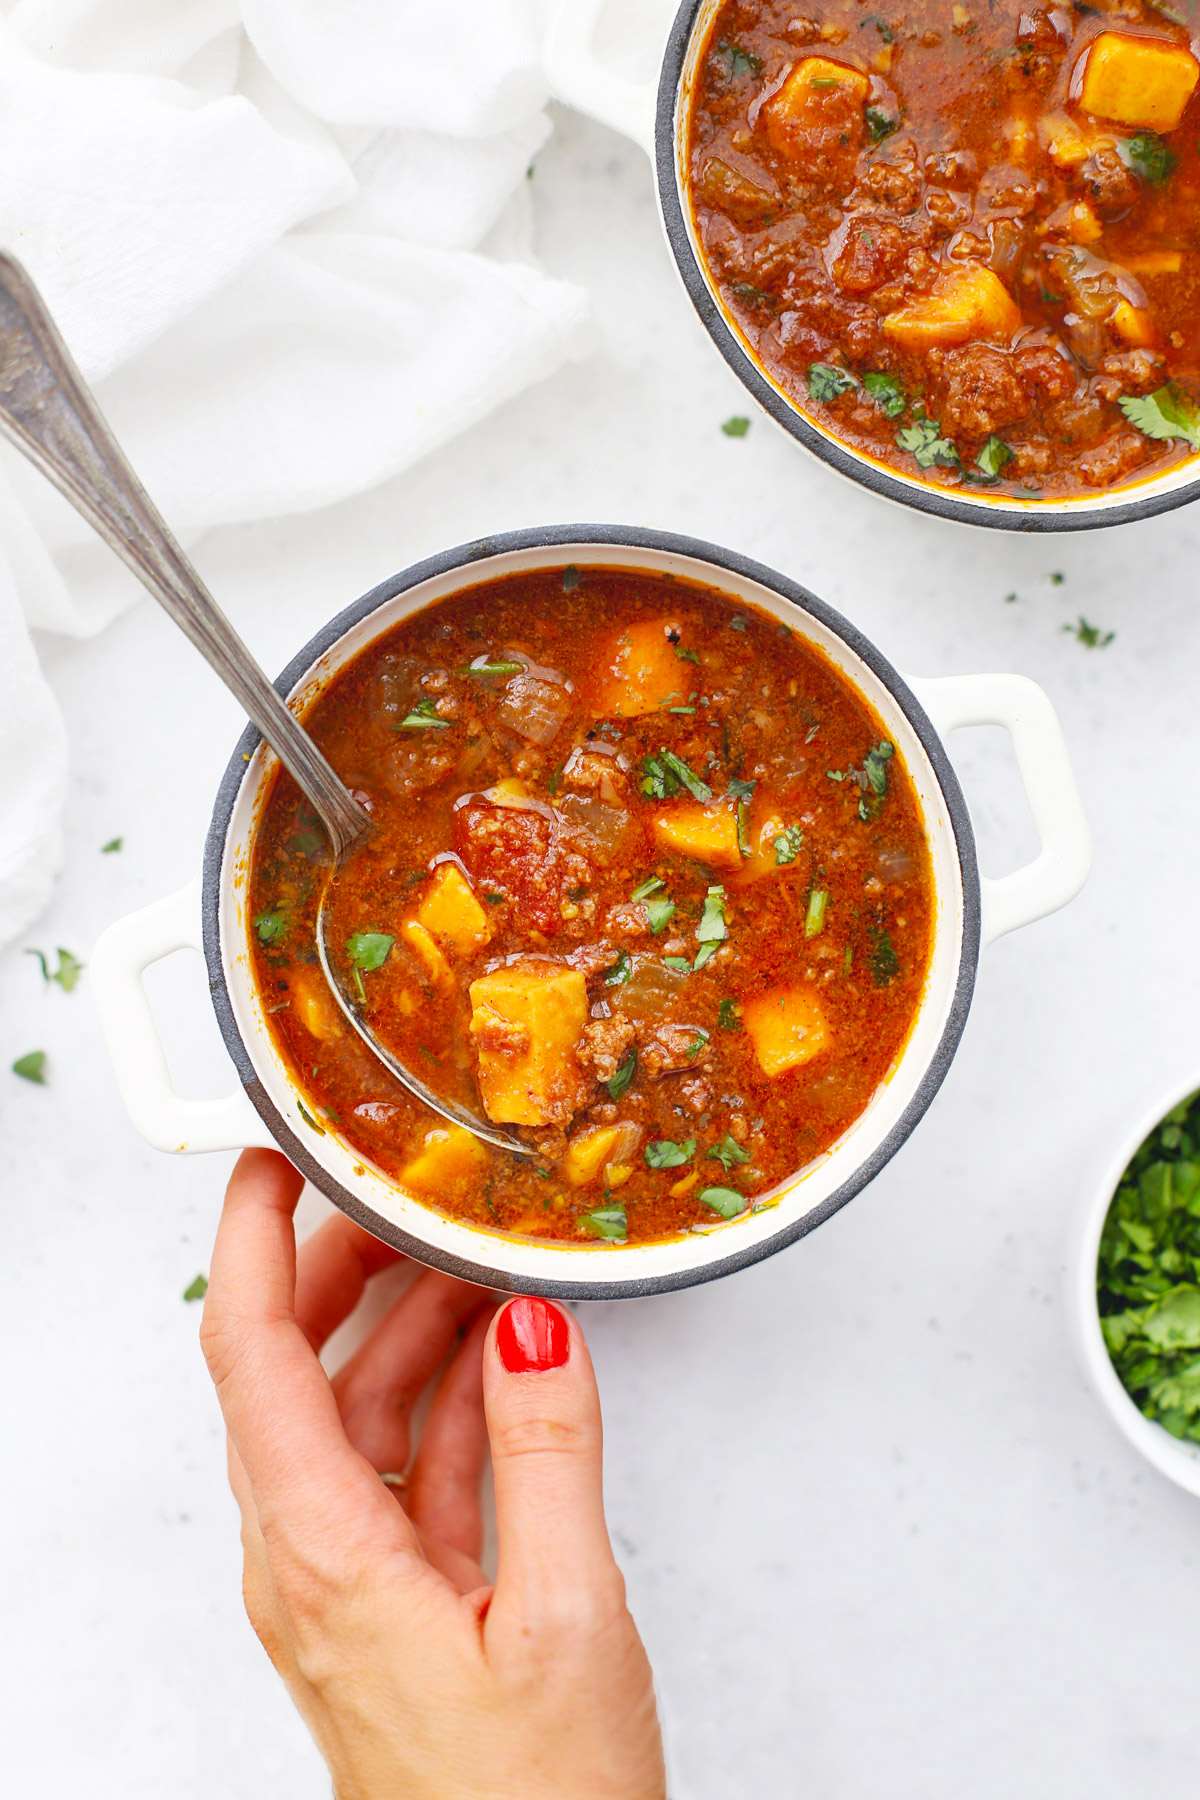 Paleo Slow Cooker Sweet Potato Chili from One Lovely Life